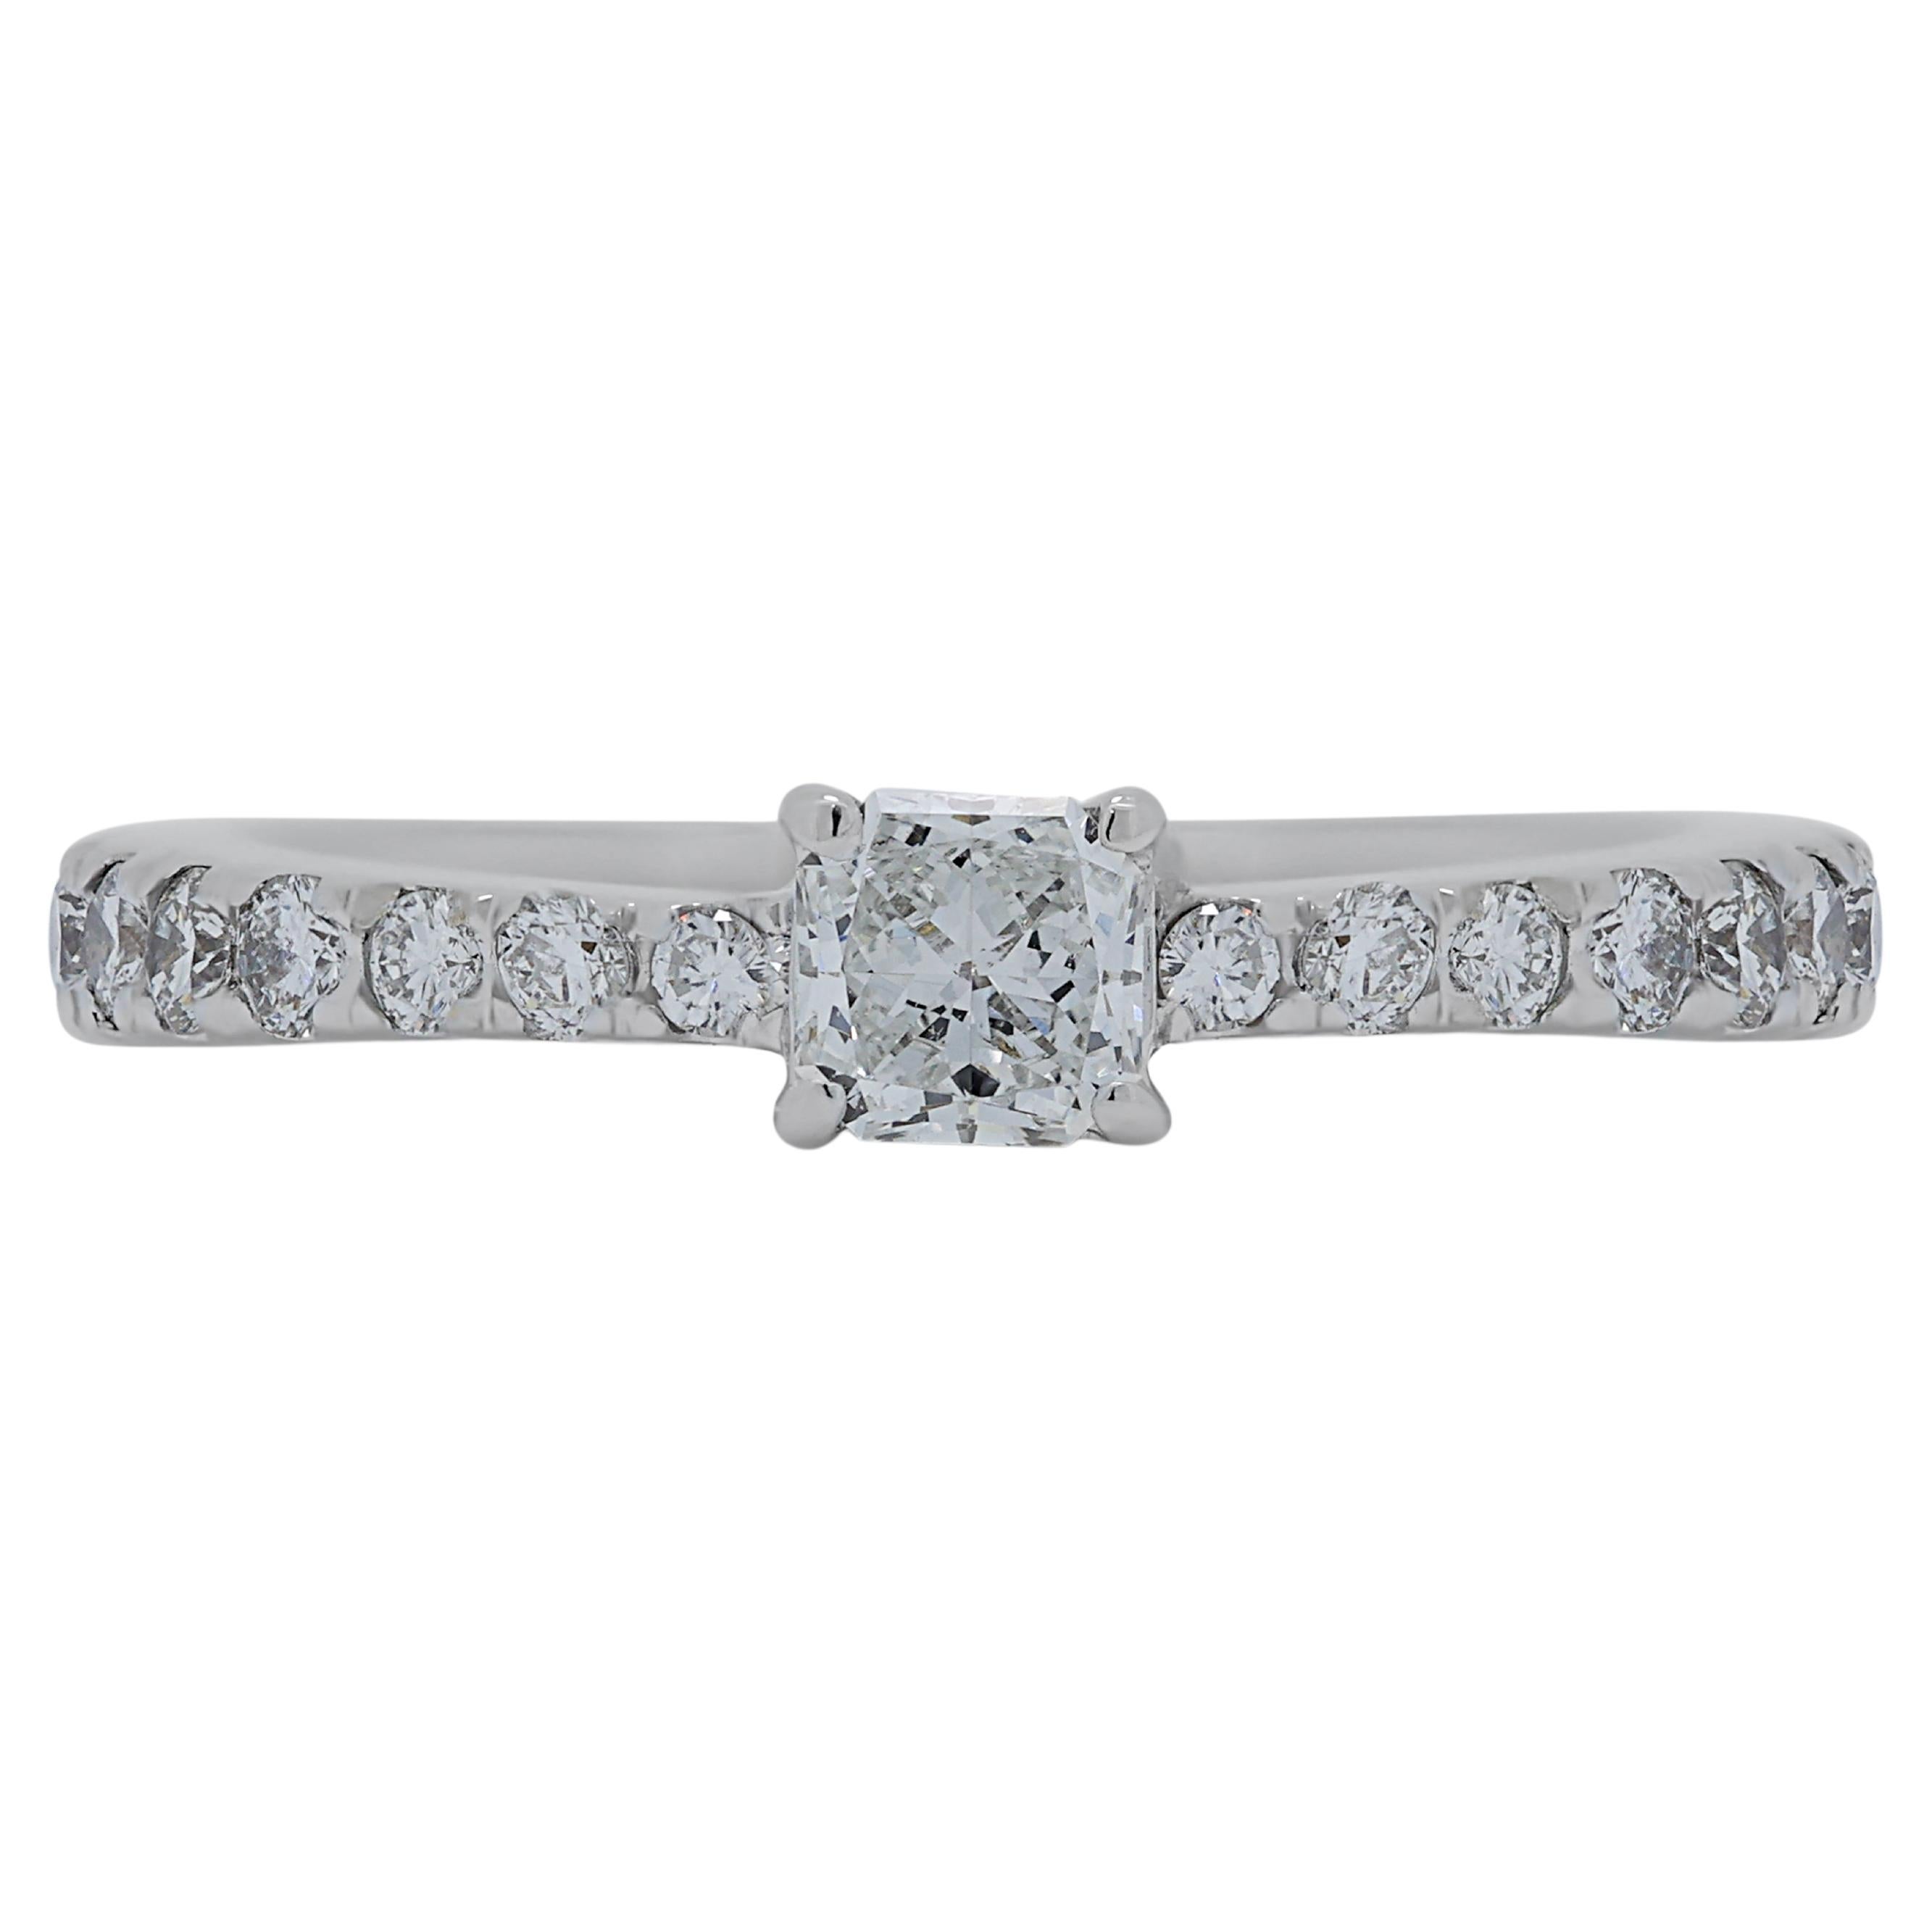 Sparkling 0.42ct Diamonds Pave Ring in 18K White Gold